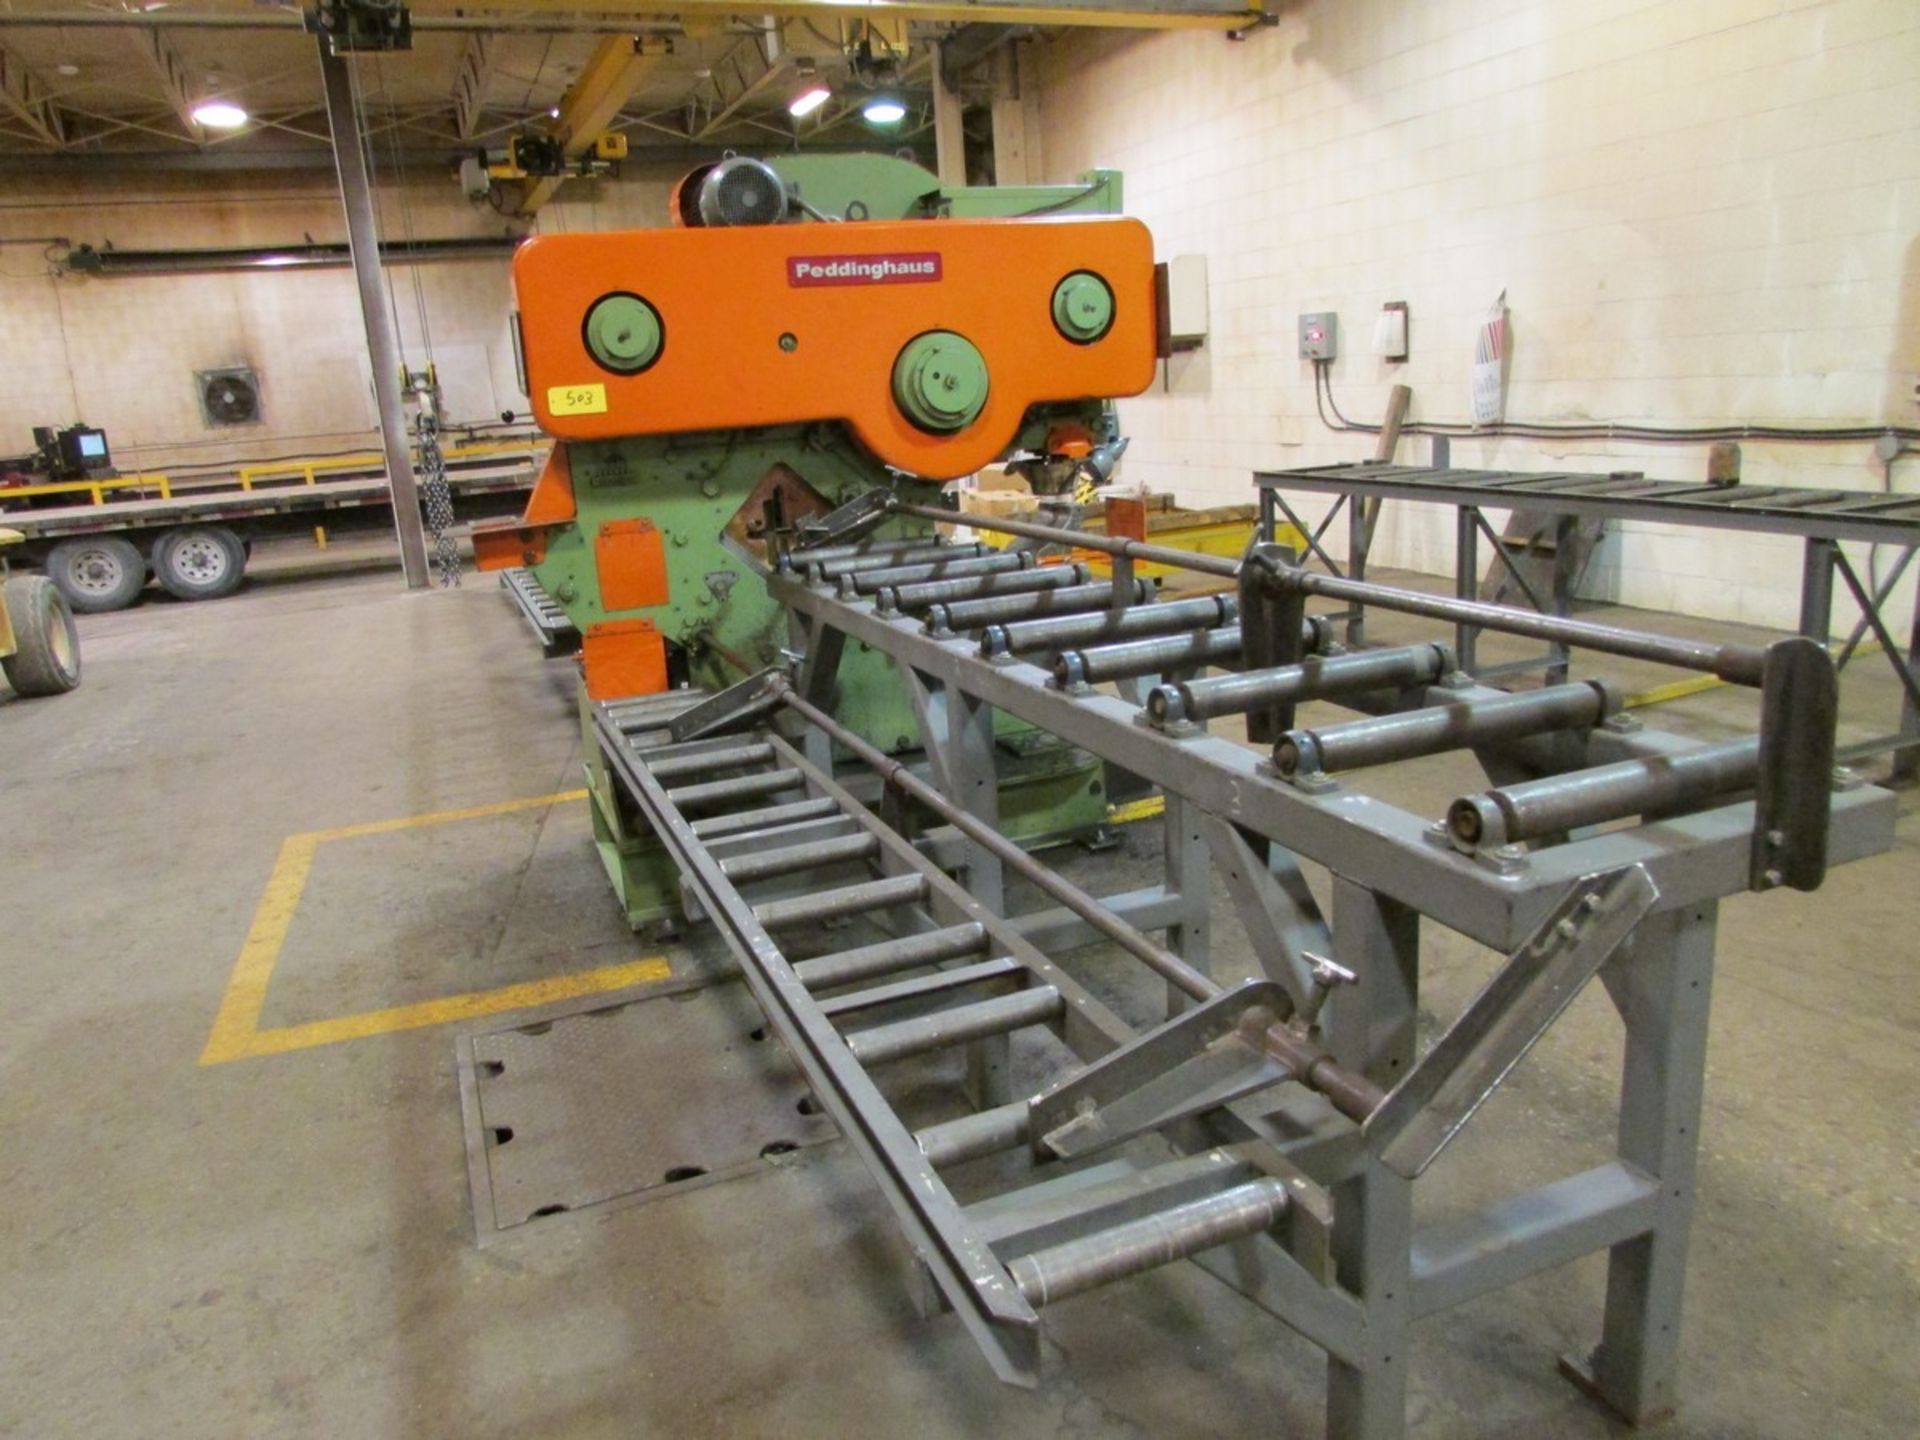 Peddinghaus Model 210A/20, 100 Ton Mechanical Iron Worker, s/n FI018 c/w Infeed & Outfeed Conveyors - Image 2 of 5